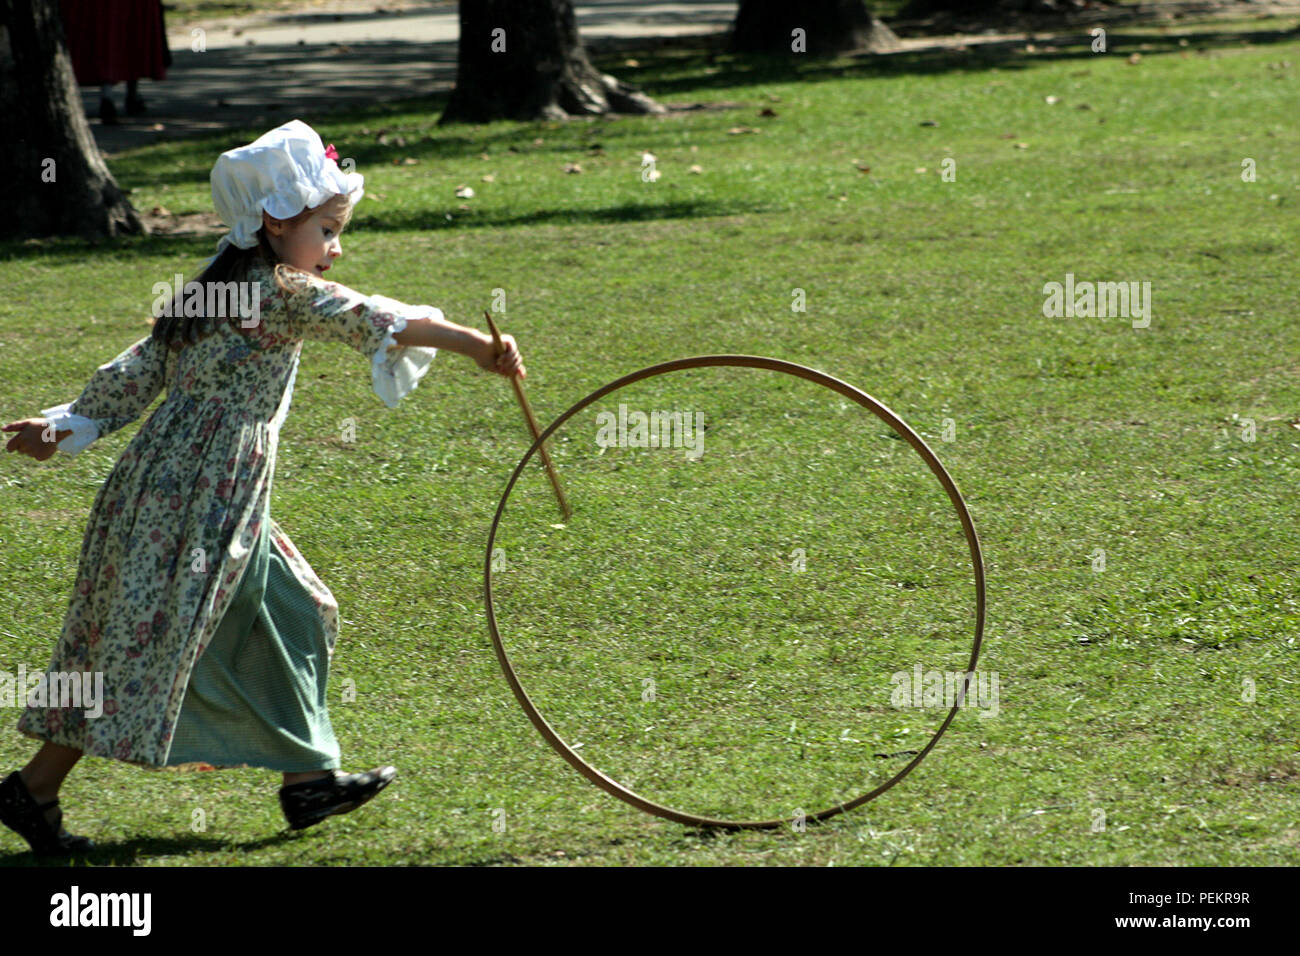 Hoop Rolling Game High Resolution Stock Photography and Images - Alamy